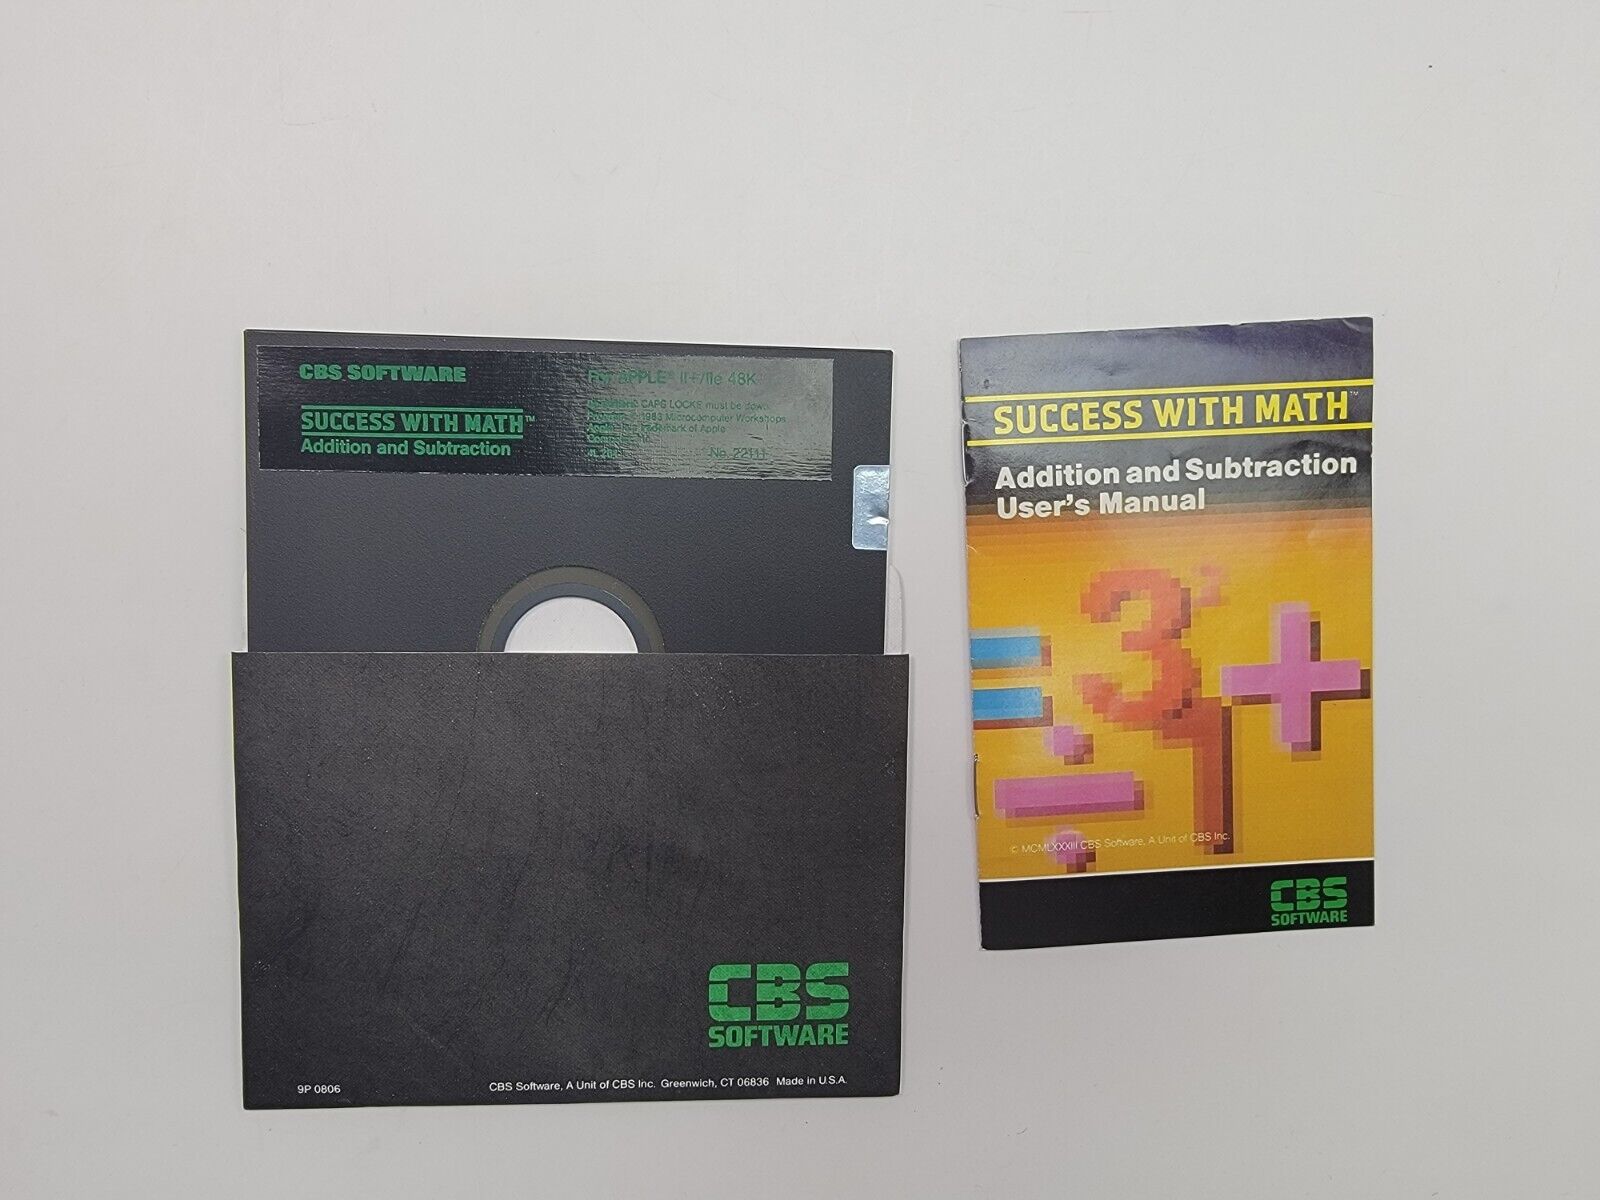 CBS Software Success With Math 5.25 Floppy Disk